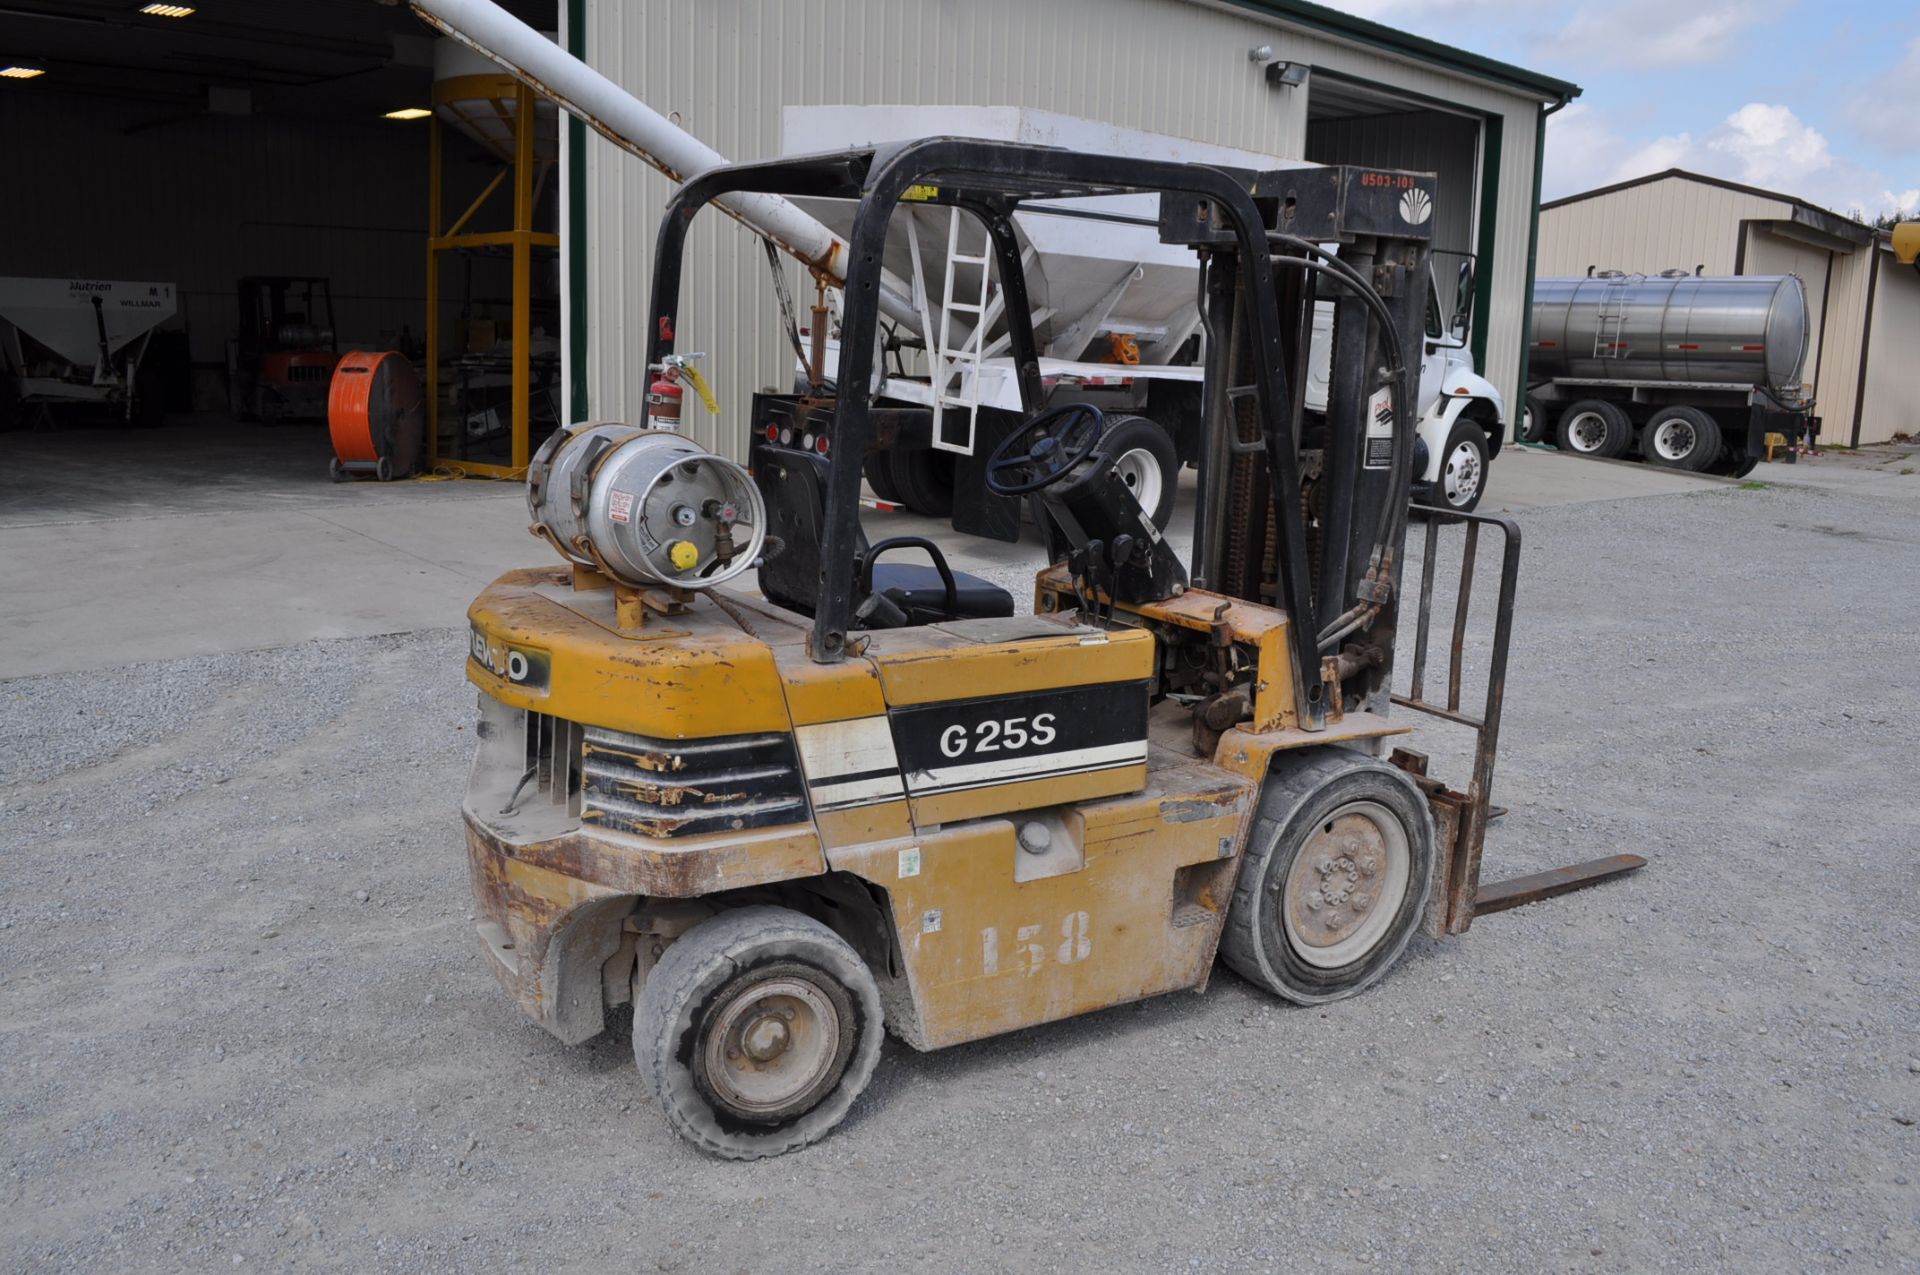 Daewoo G25S forklift, propane, sideshift, 7.00x15 front tires, 6.50-10 rear tires, 3 stage mast - Image 3 of 7